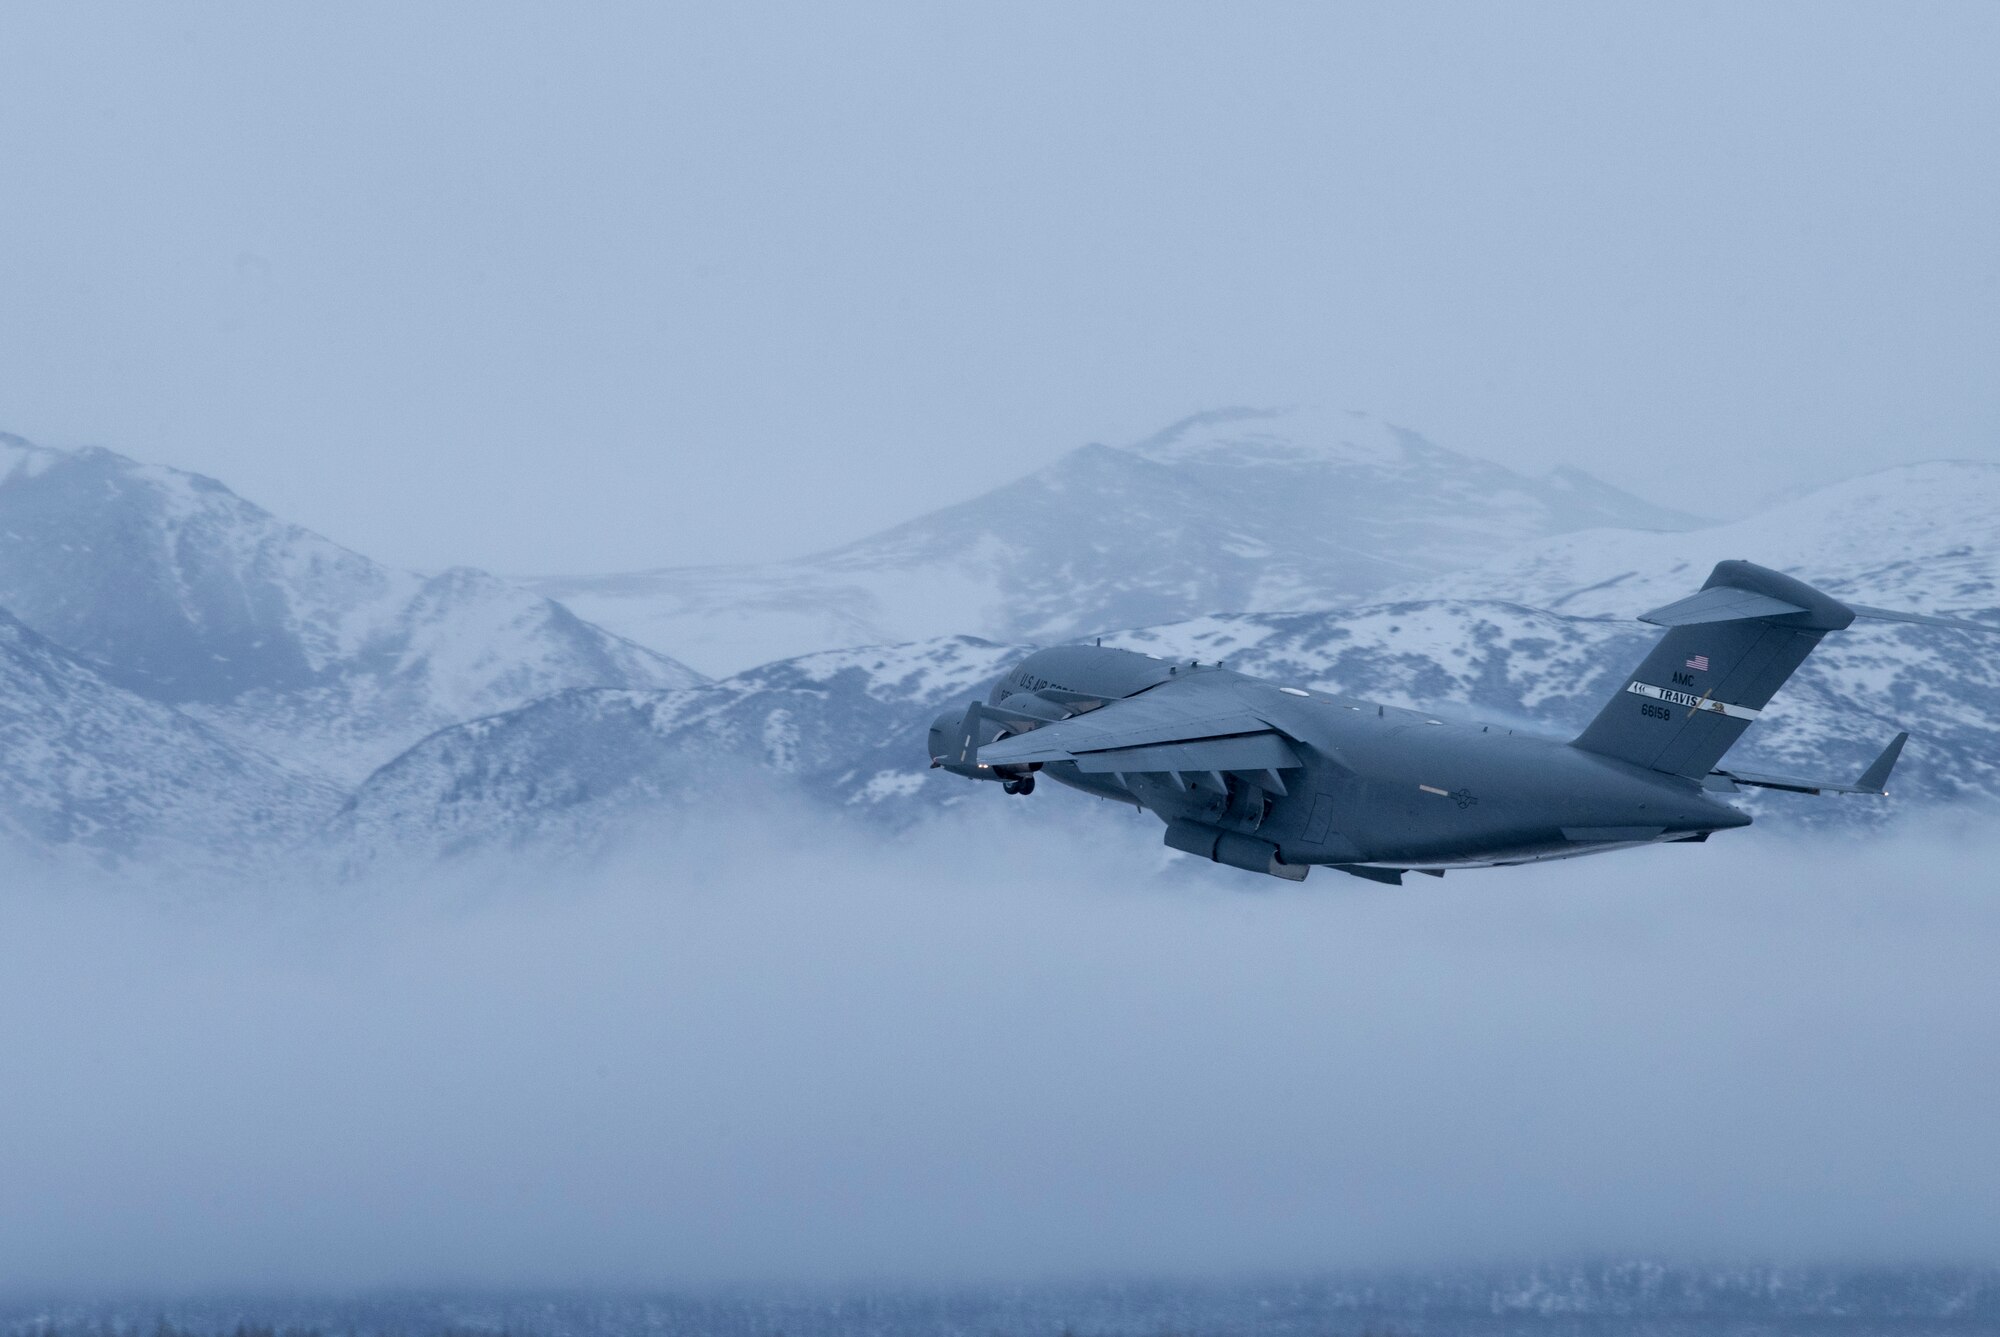 A U.S. Air Force C-17 Globemaster III assigned to Travis Air Force Base, Calif., flies over the Chugach Mountains during cold weather aircraft maintenance procedures training at Joint Base Elmendorf-Richardson, Alaska, Nov. 19, 2019. The training prepared Airmen to operate in arctic environments.